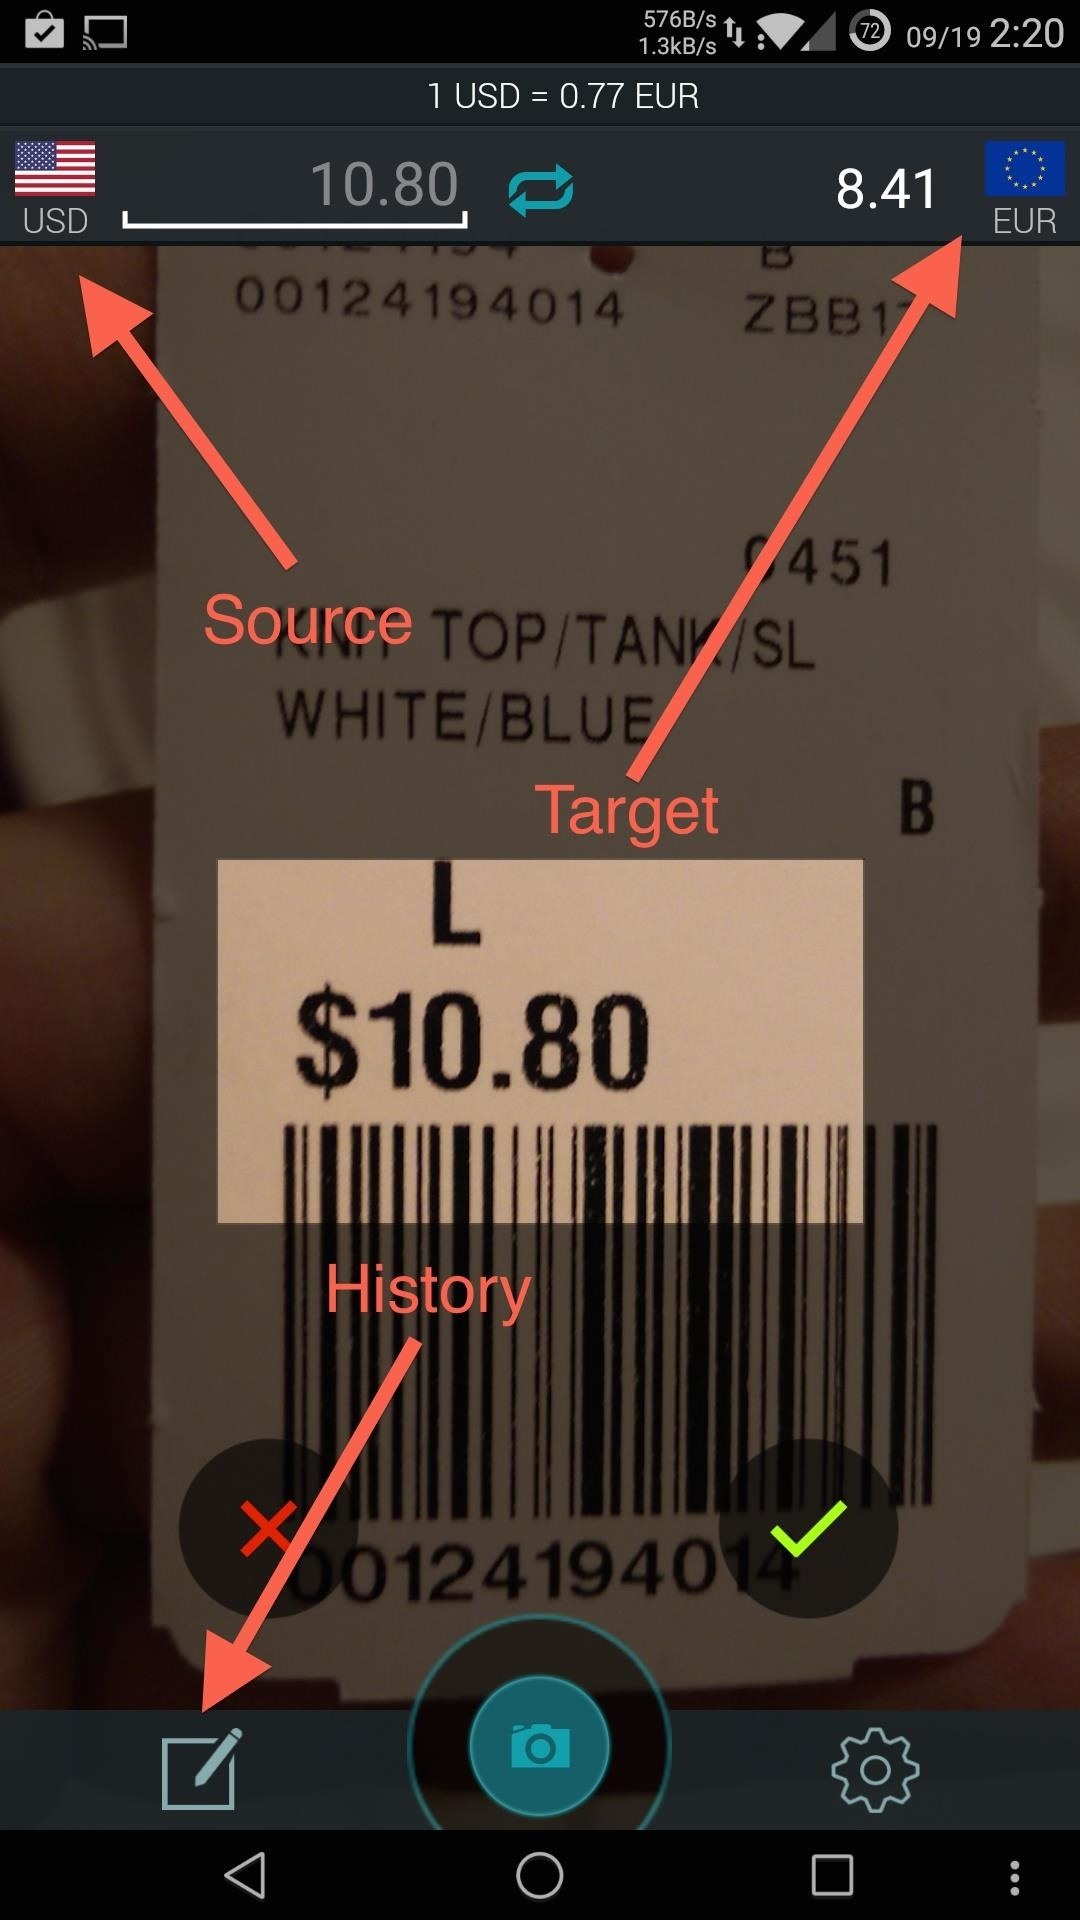 Use Your Android's Camera to Automatically Convert Foreign Price Tags